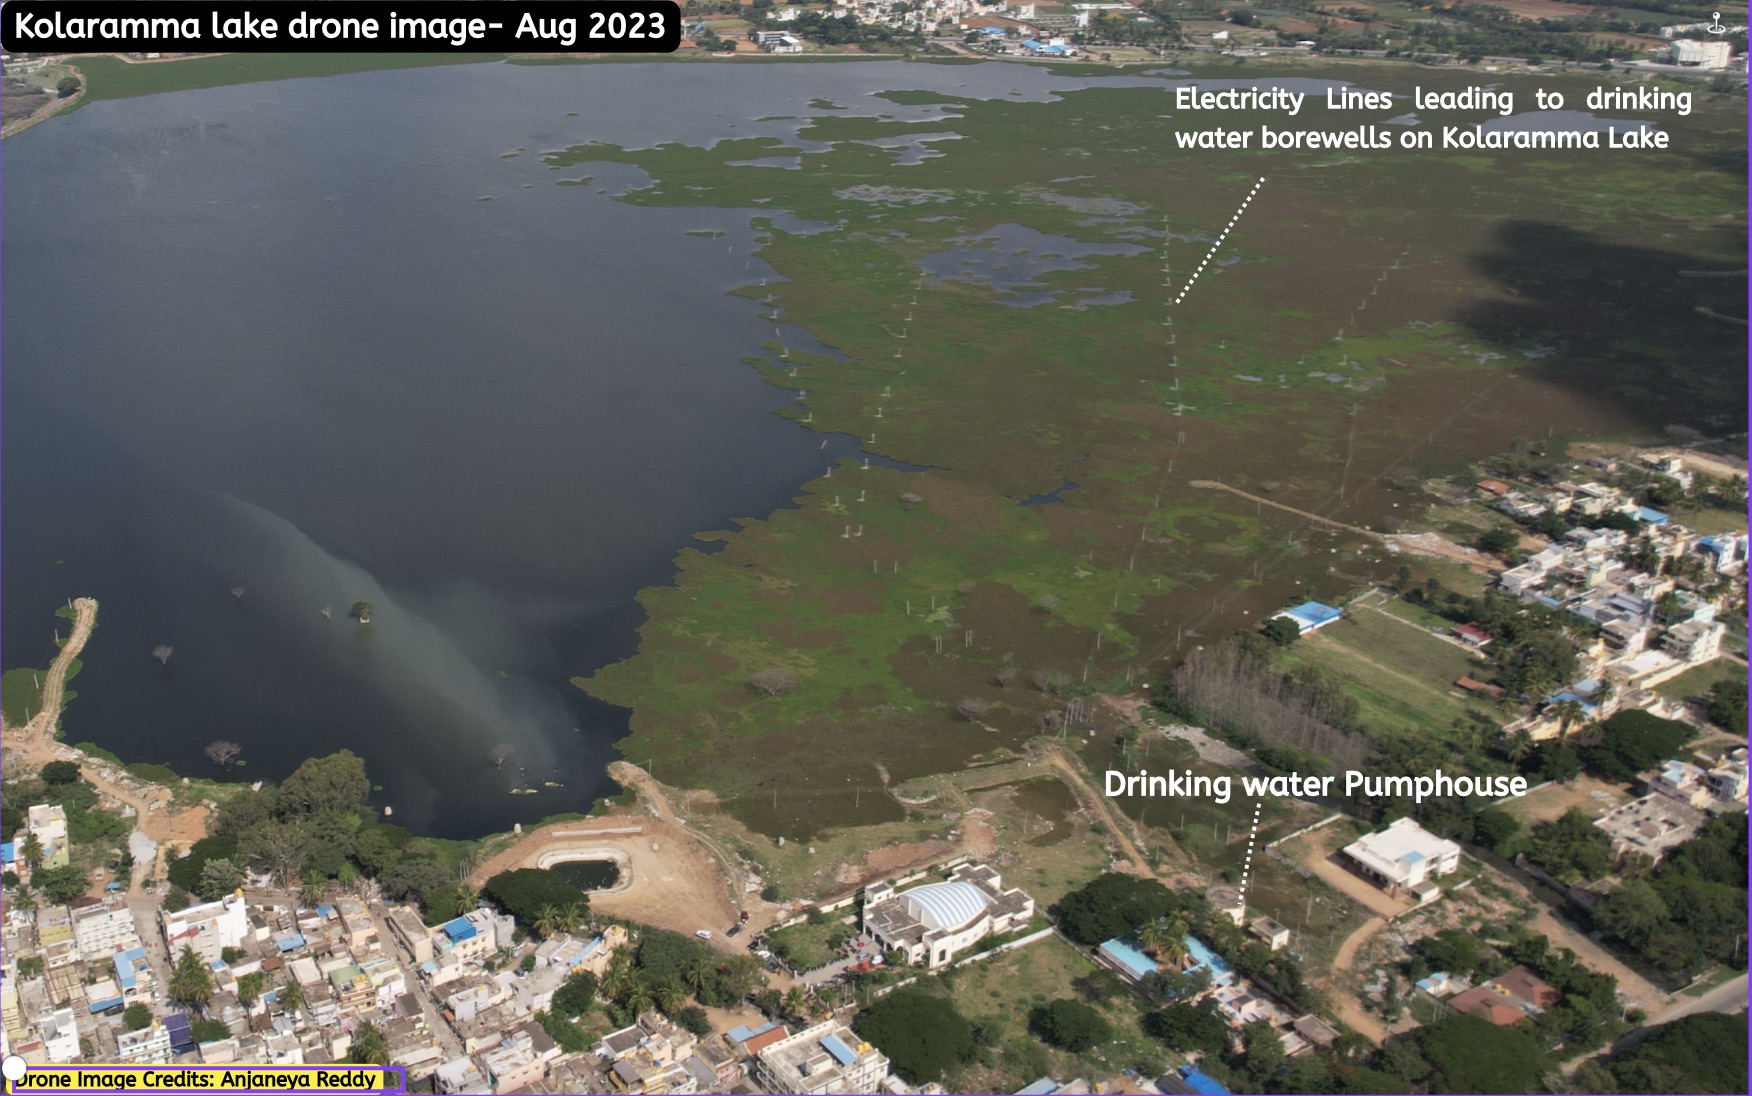 Kolaramma Lake filled with KC valley secondary treated wastewater. Water Hyacinth is observed